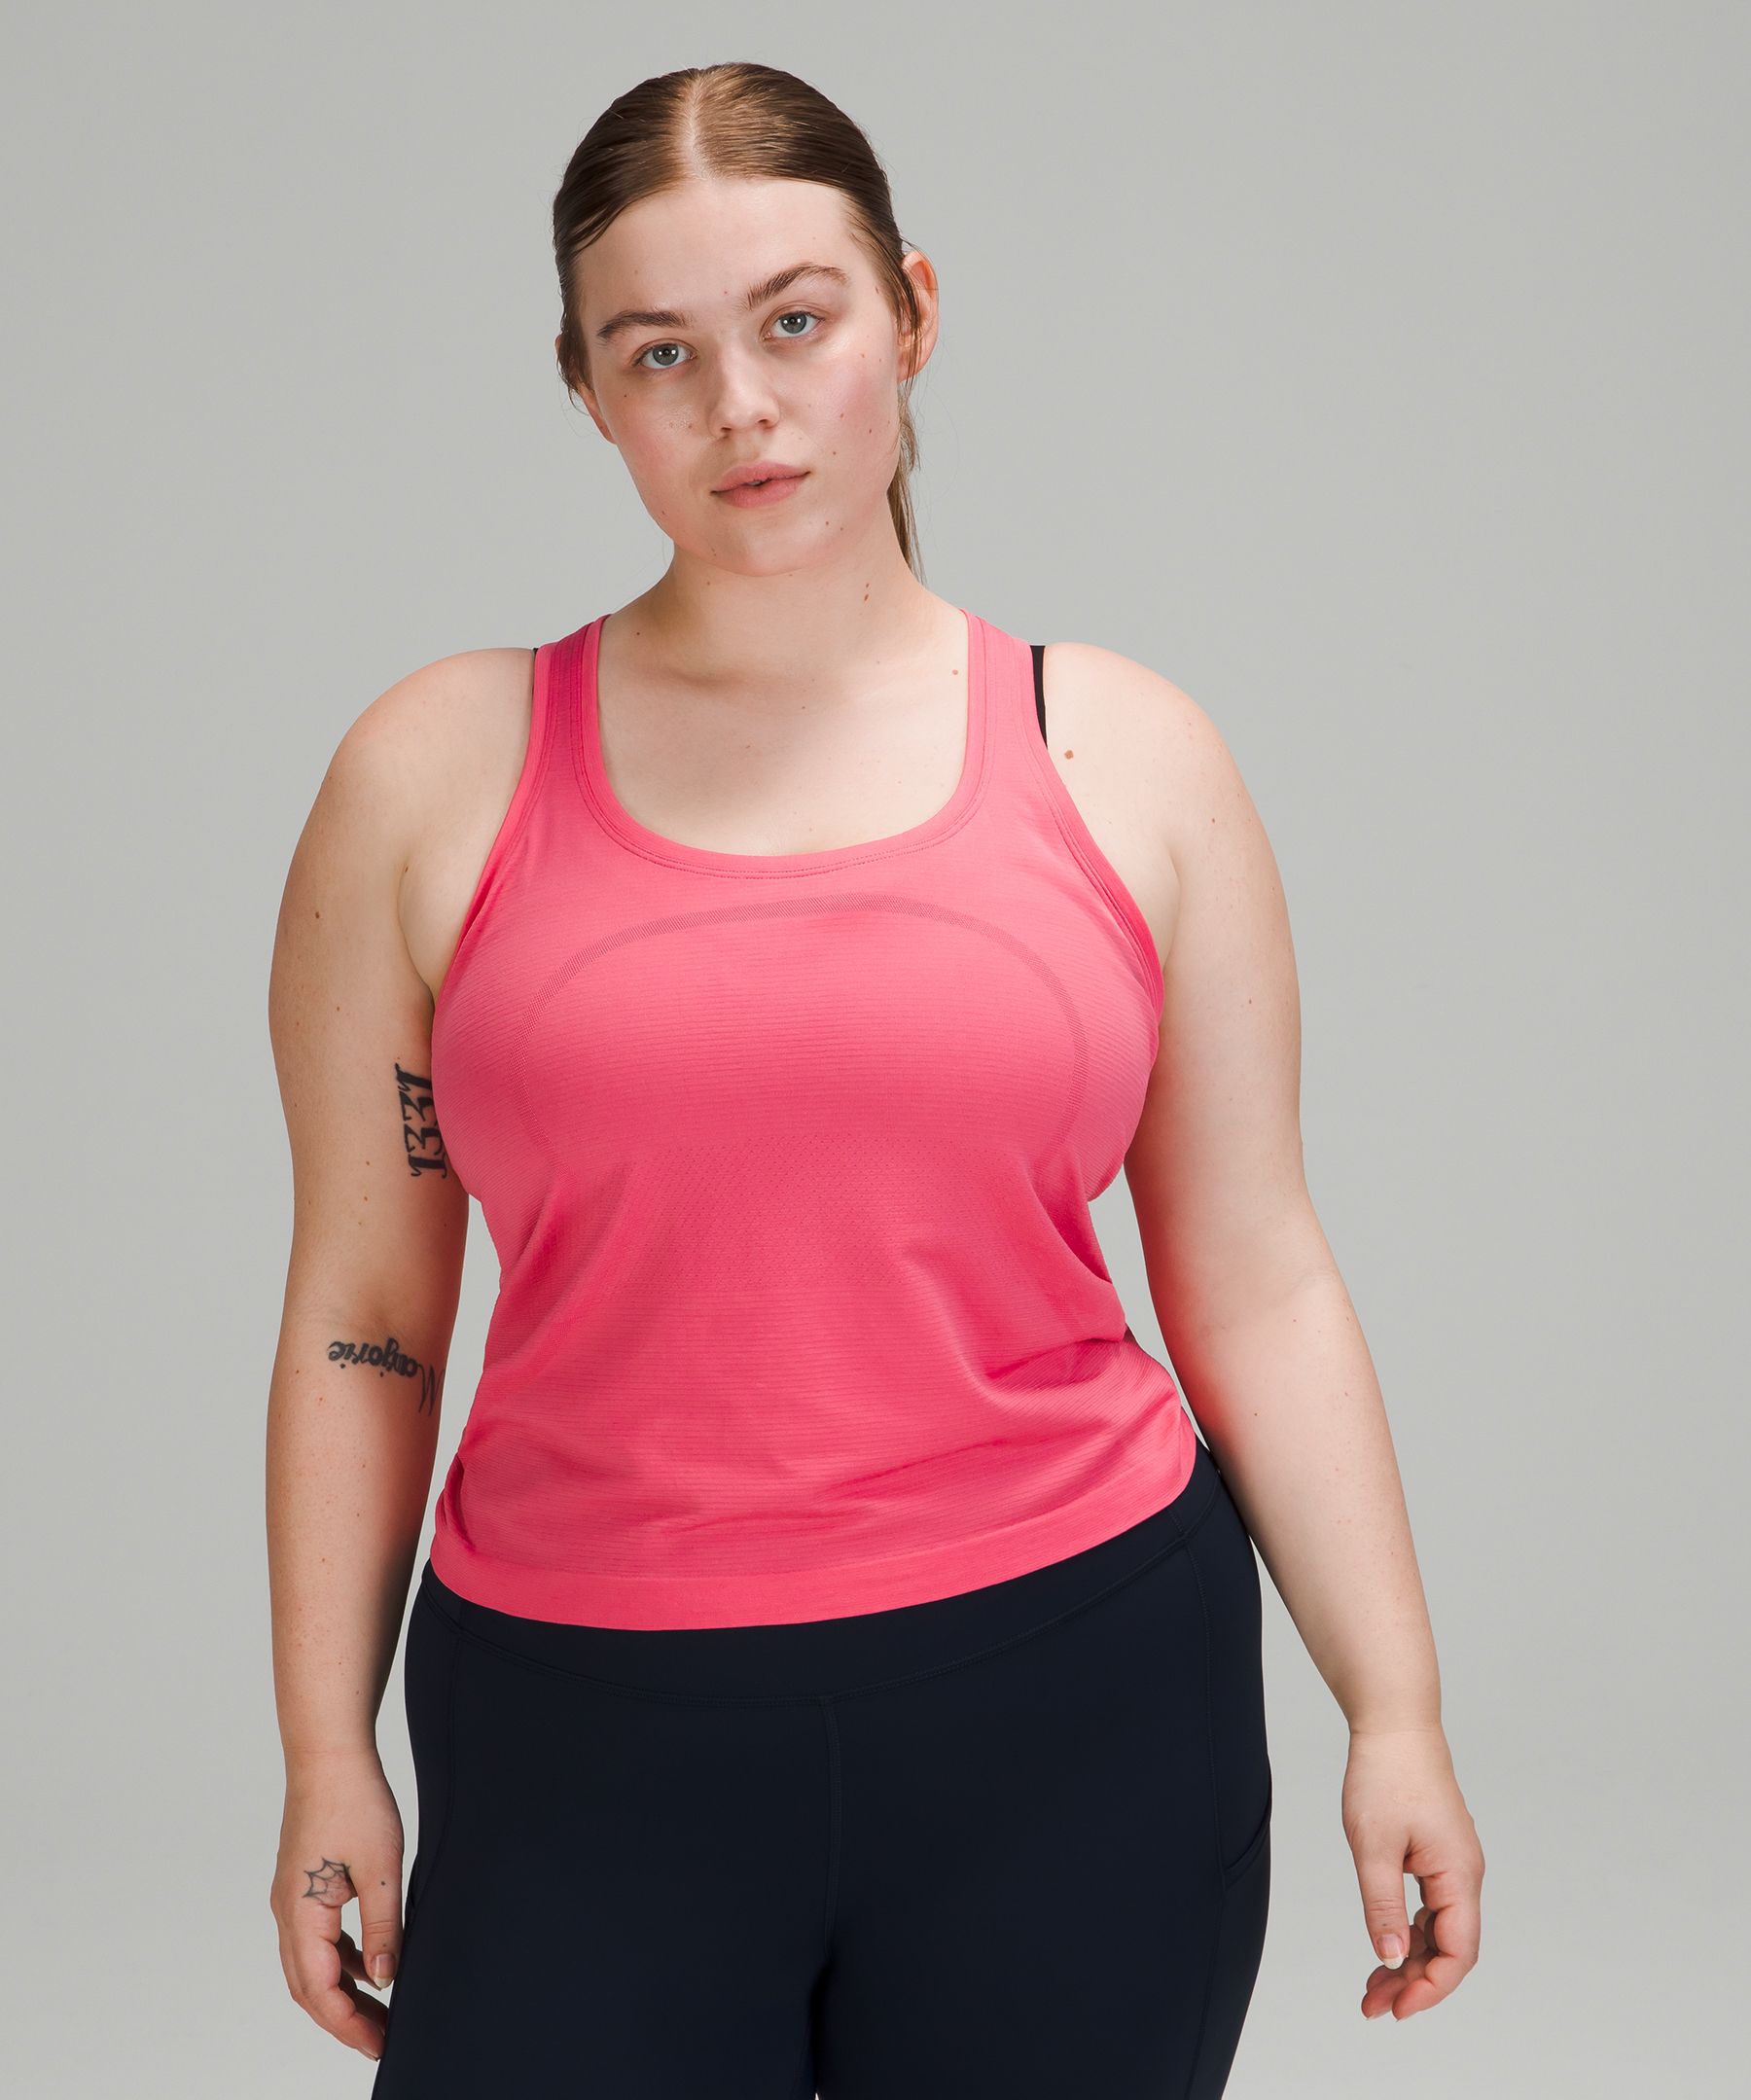 Lululemon Swiftly Tech Racerback Tank Top 2.0 Race Length In Guava Pink/guava Pink